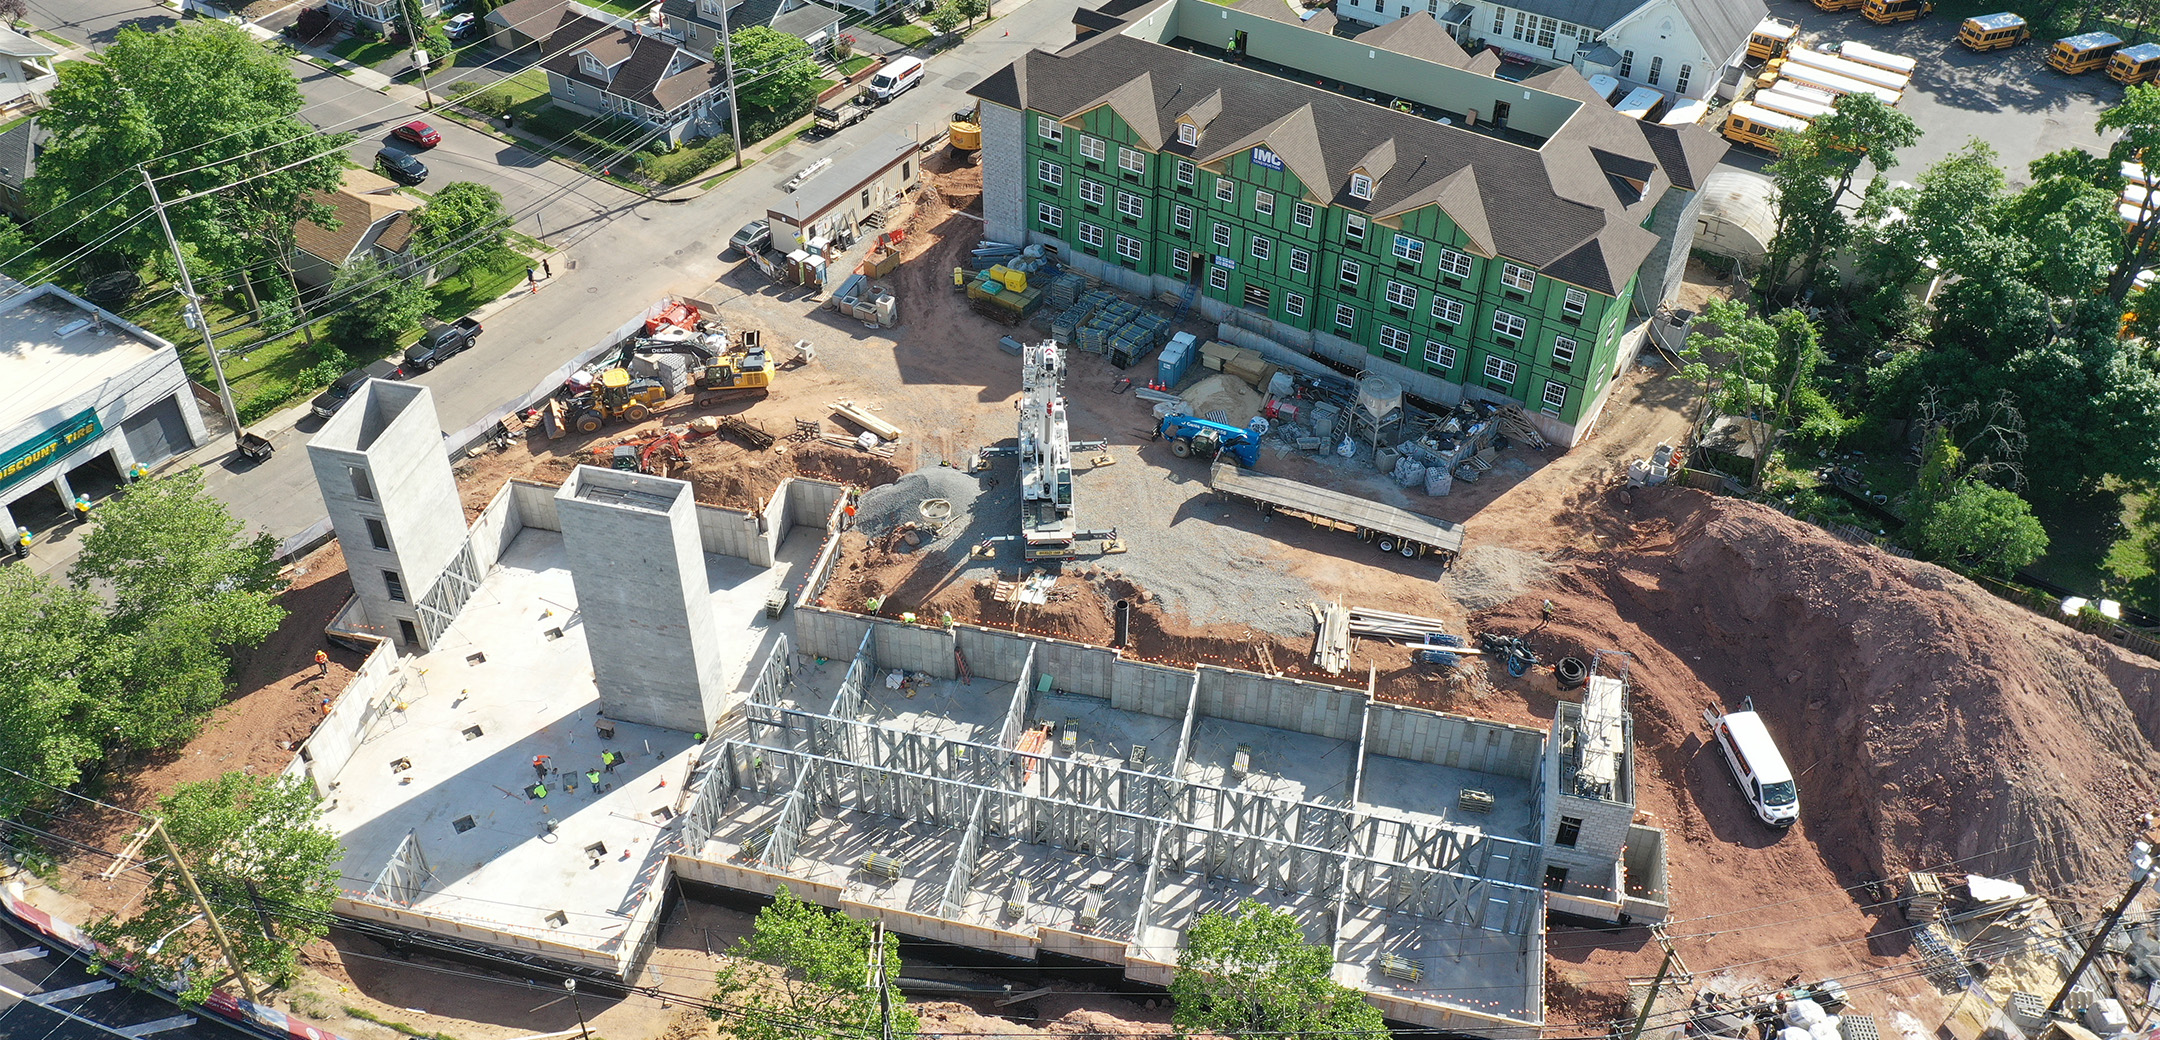 The aerial view of the two Chelsea senior living buildings under construction.